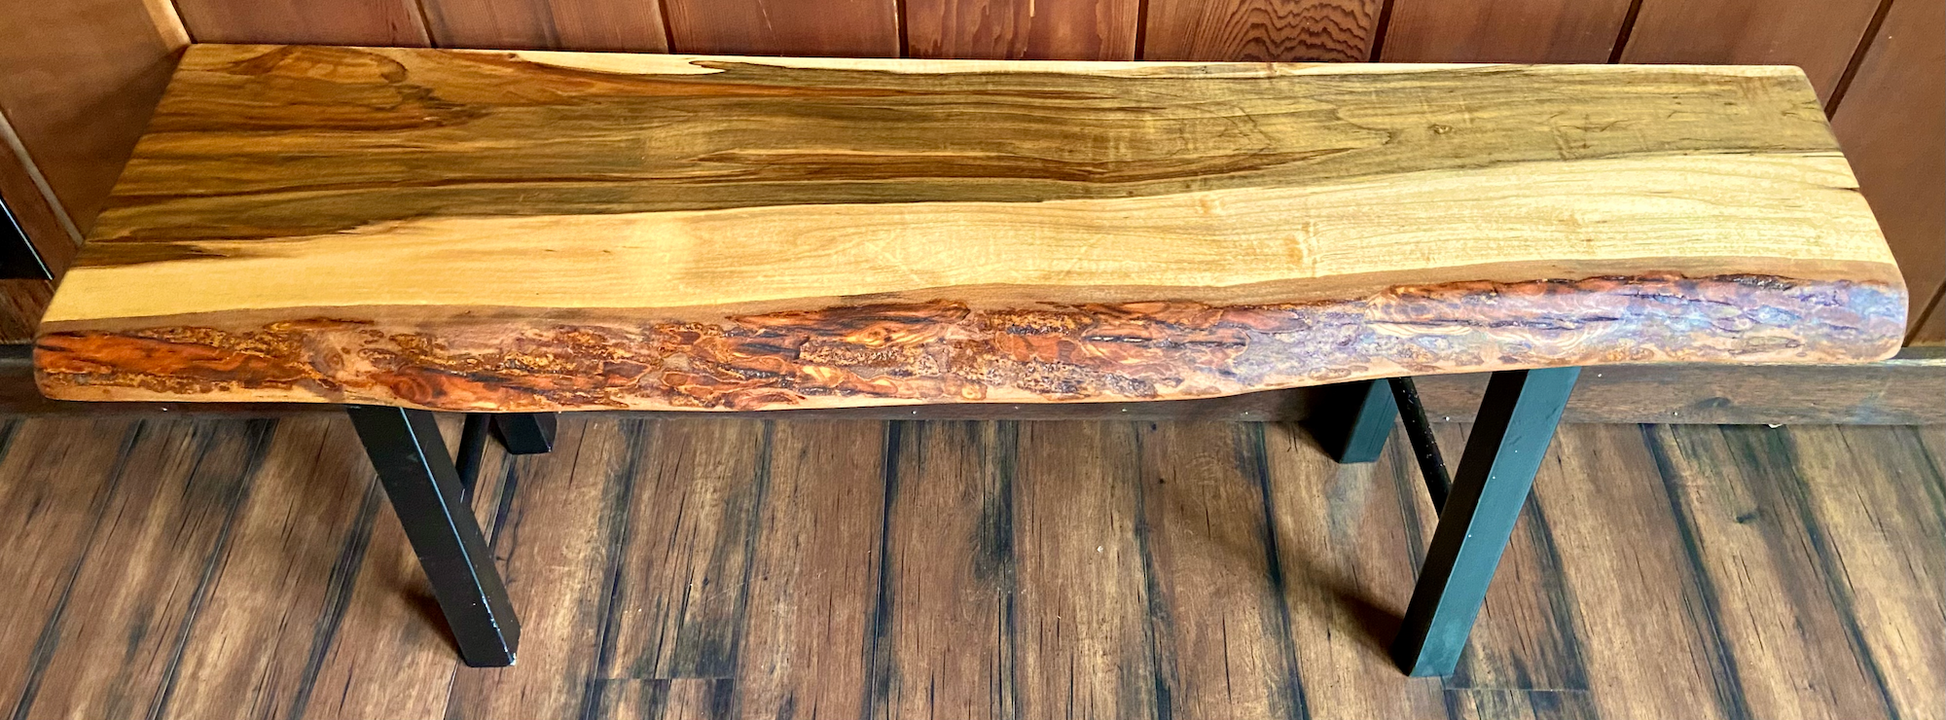 Rustic Ambrosia Maple Live Edge Entryway Bench|Farmhouse Bench|Mudroom Bench|Live Edge Dining Room Bench|Maple Wooden Bench|Bedroom Bench